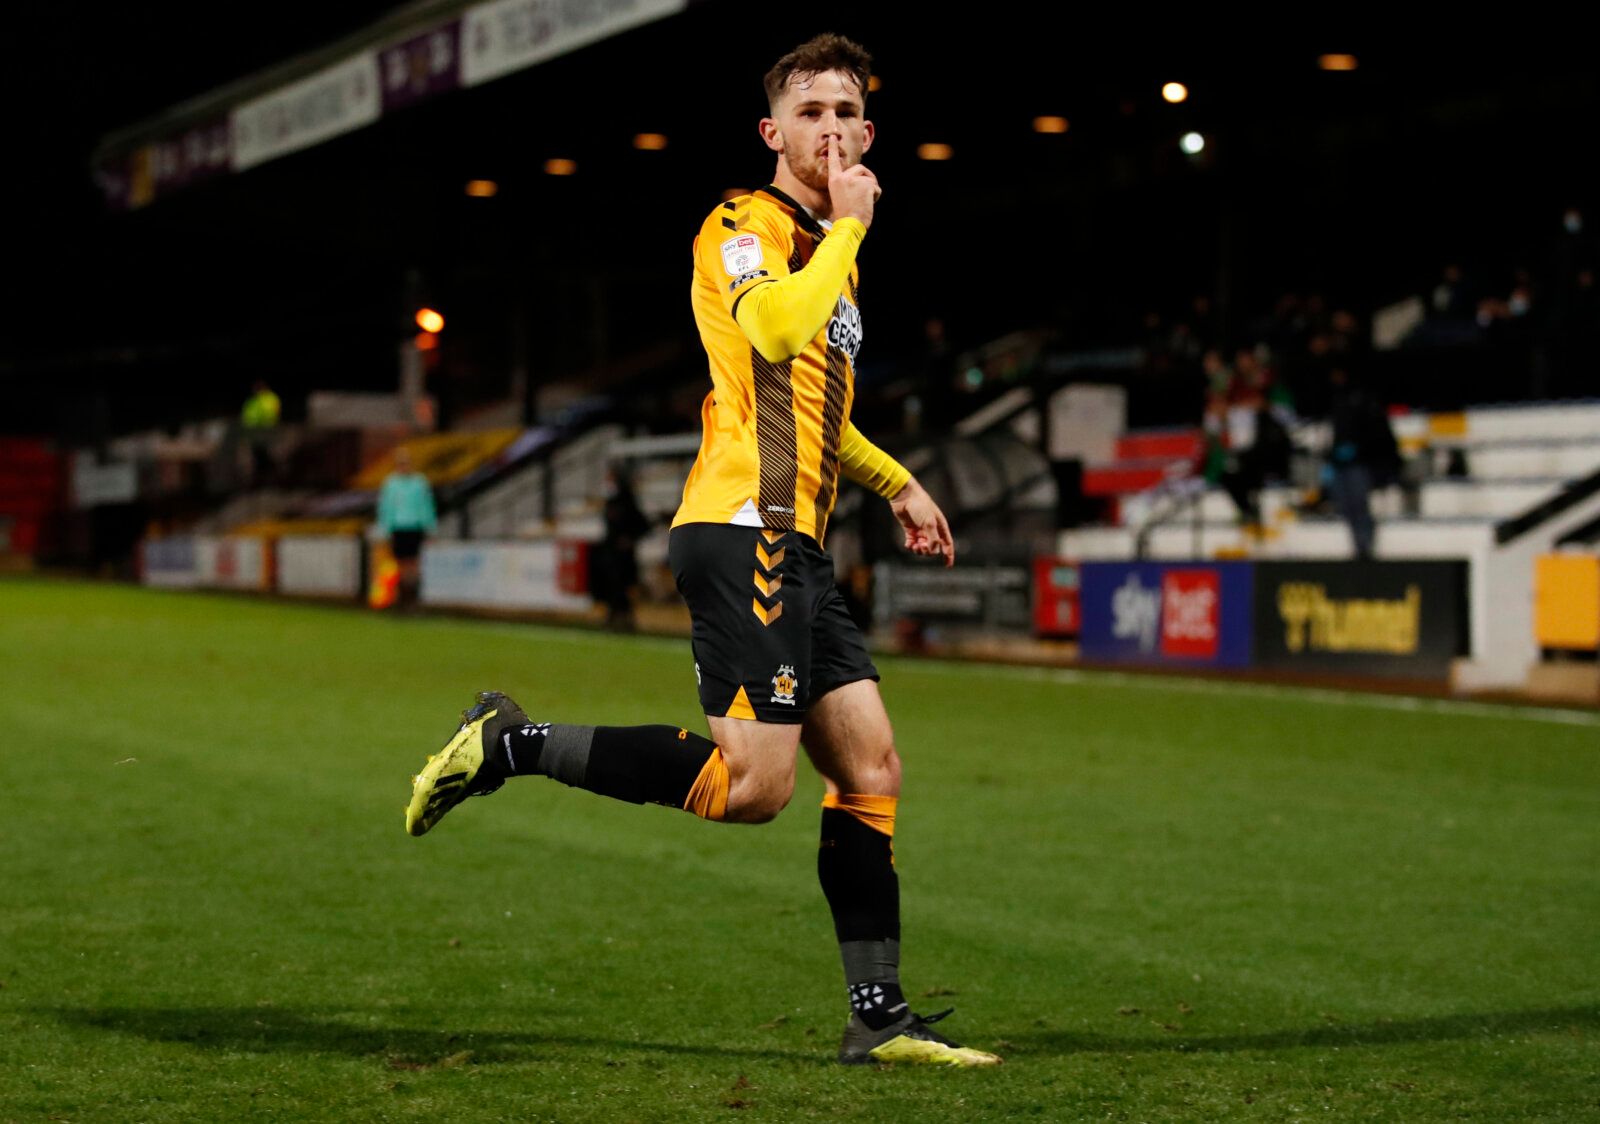 Soccer Football - League Two - Cambridge United v Salford City - Abbey Stadium, Cambridge, Britain - November 3, 2020 Cambridge United's Jack Iredale celebrates after scoring their first goal Action Images/Andrew Boyers EDITORIAL USE ONLY. No use with unauthorized audio, video, data, fixture lists, club/league logos or 'live' services. Online in-match use limited to 75 images, no video emulation. No use in betting, games or single club /league/player publications.  Please contact your account re